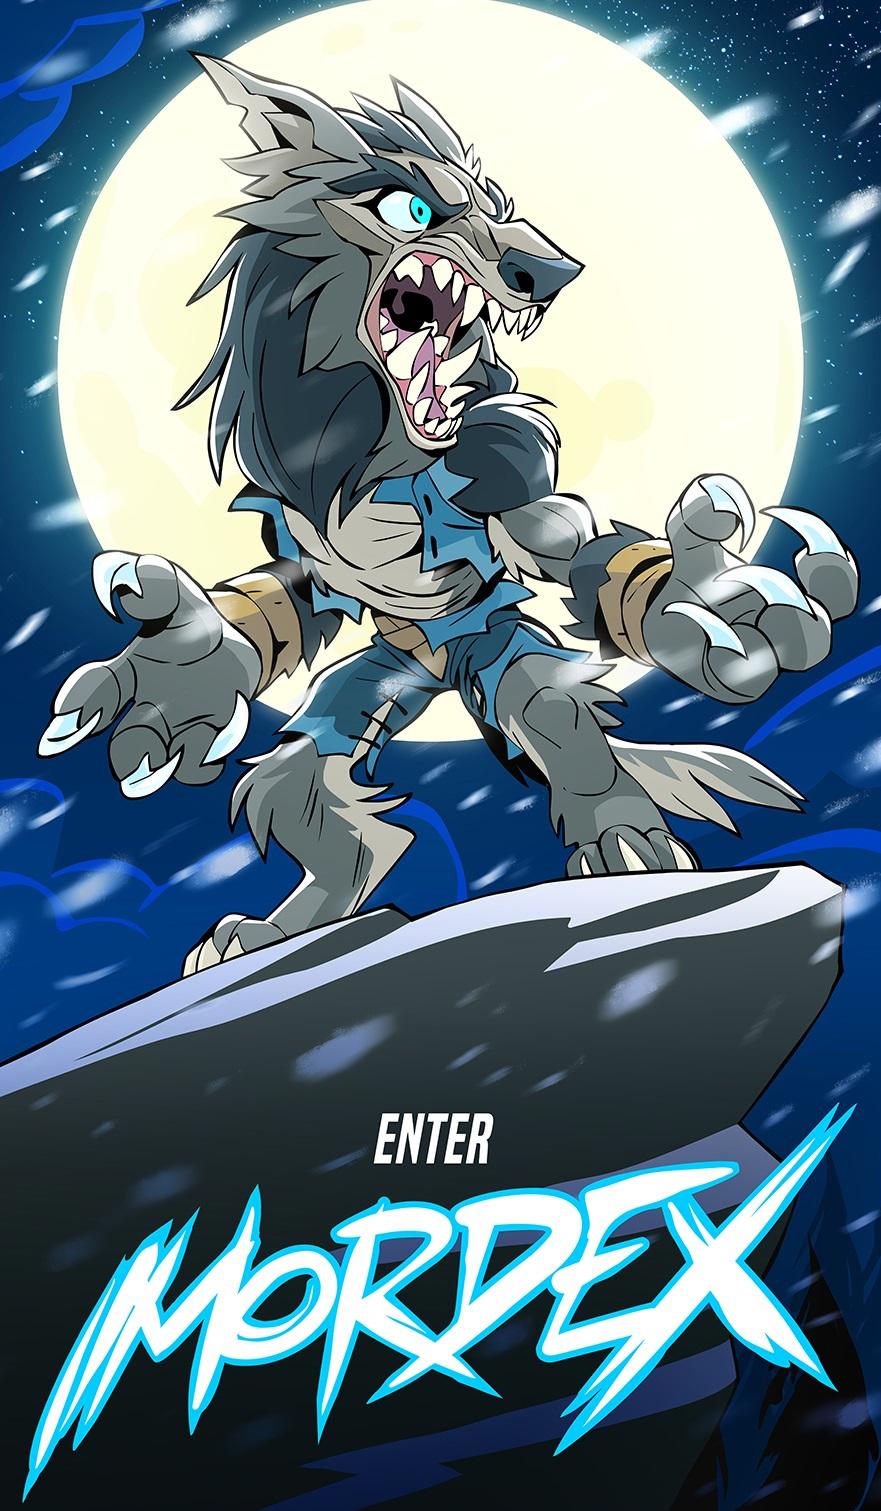 Brawlhalla Reveals Mordex at PAX East 2017